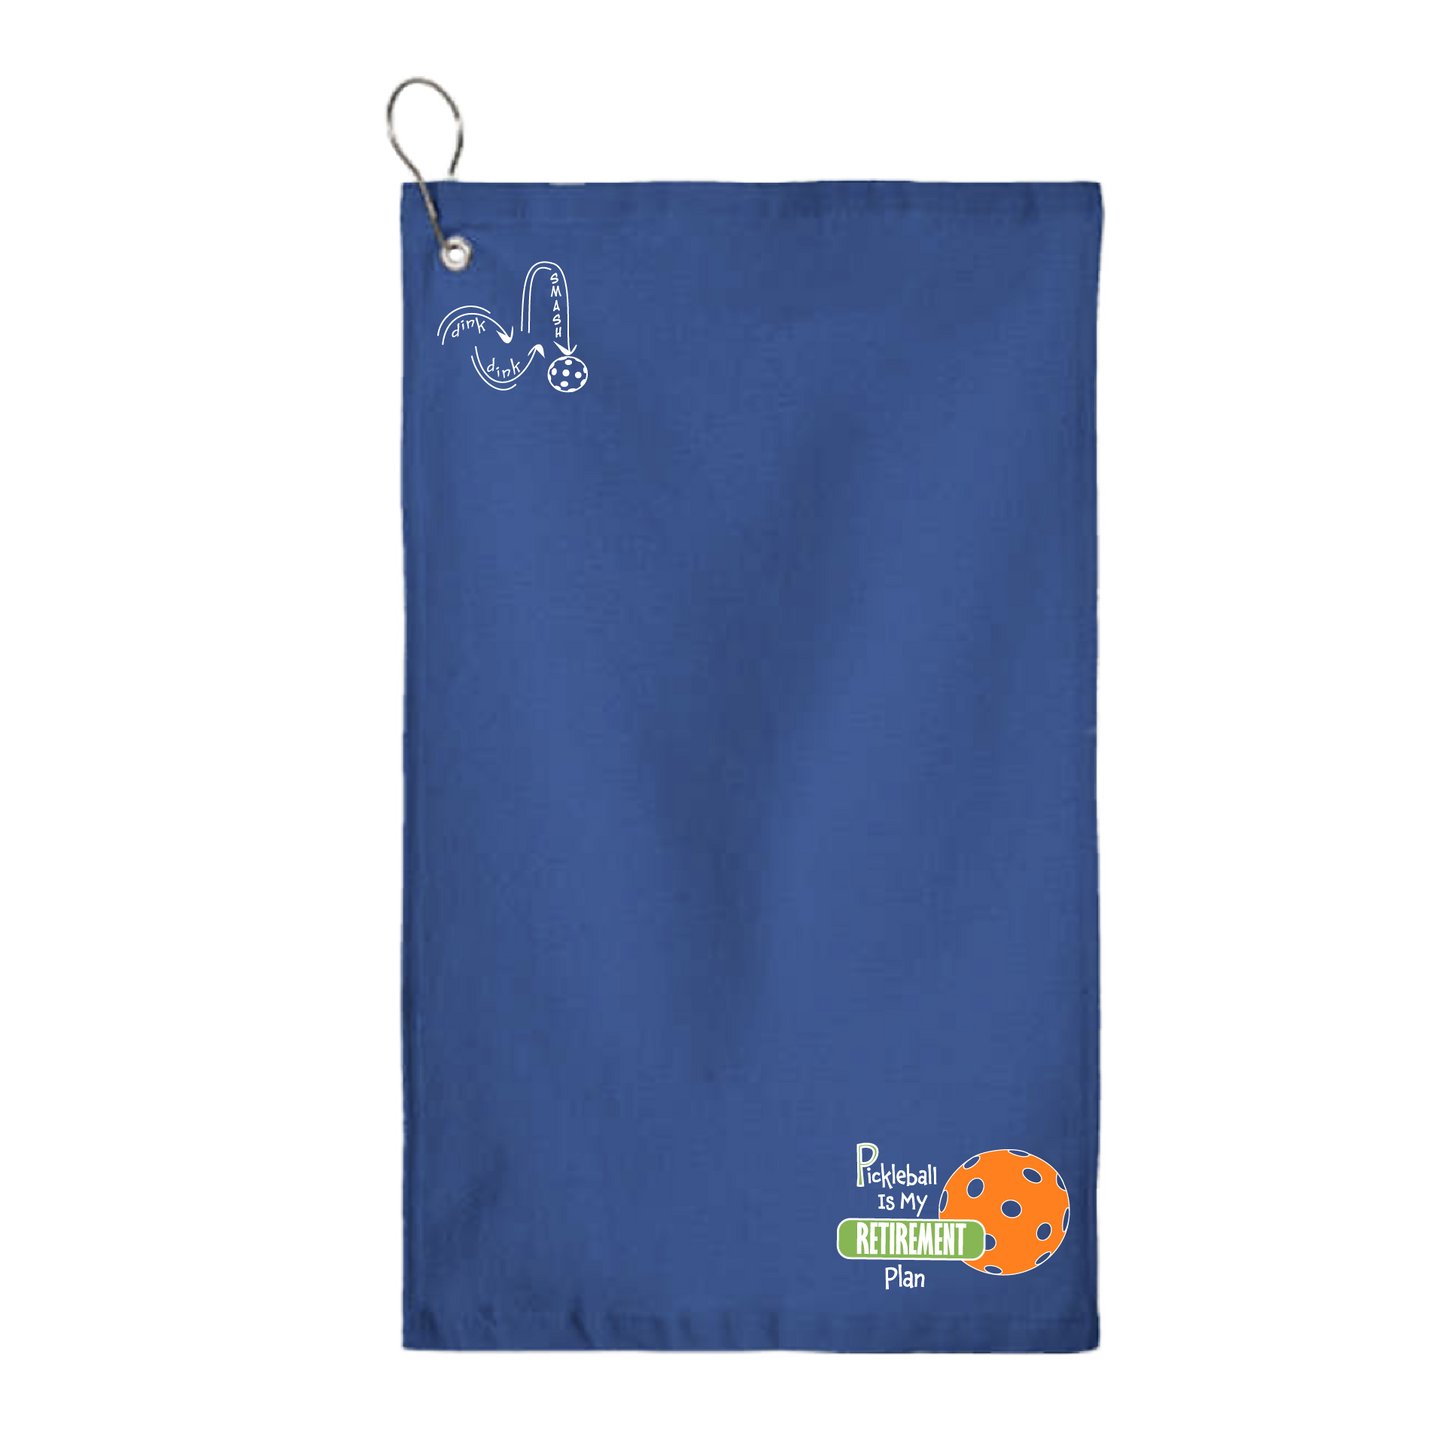 This Pickleball Is My Retirement Plan towel is crafted with cotton terry velour for optimal performance. It features grommets, hooks, and hemmed edges for added durability. It's perfect for completing your pickleball gear, and an ideal gift for friends and tournaments. The towel is designed to be both absorbent and lightweight, so you can remain dry and comfortable while you play.